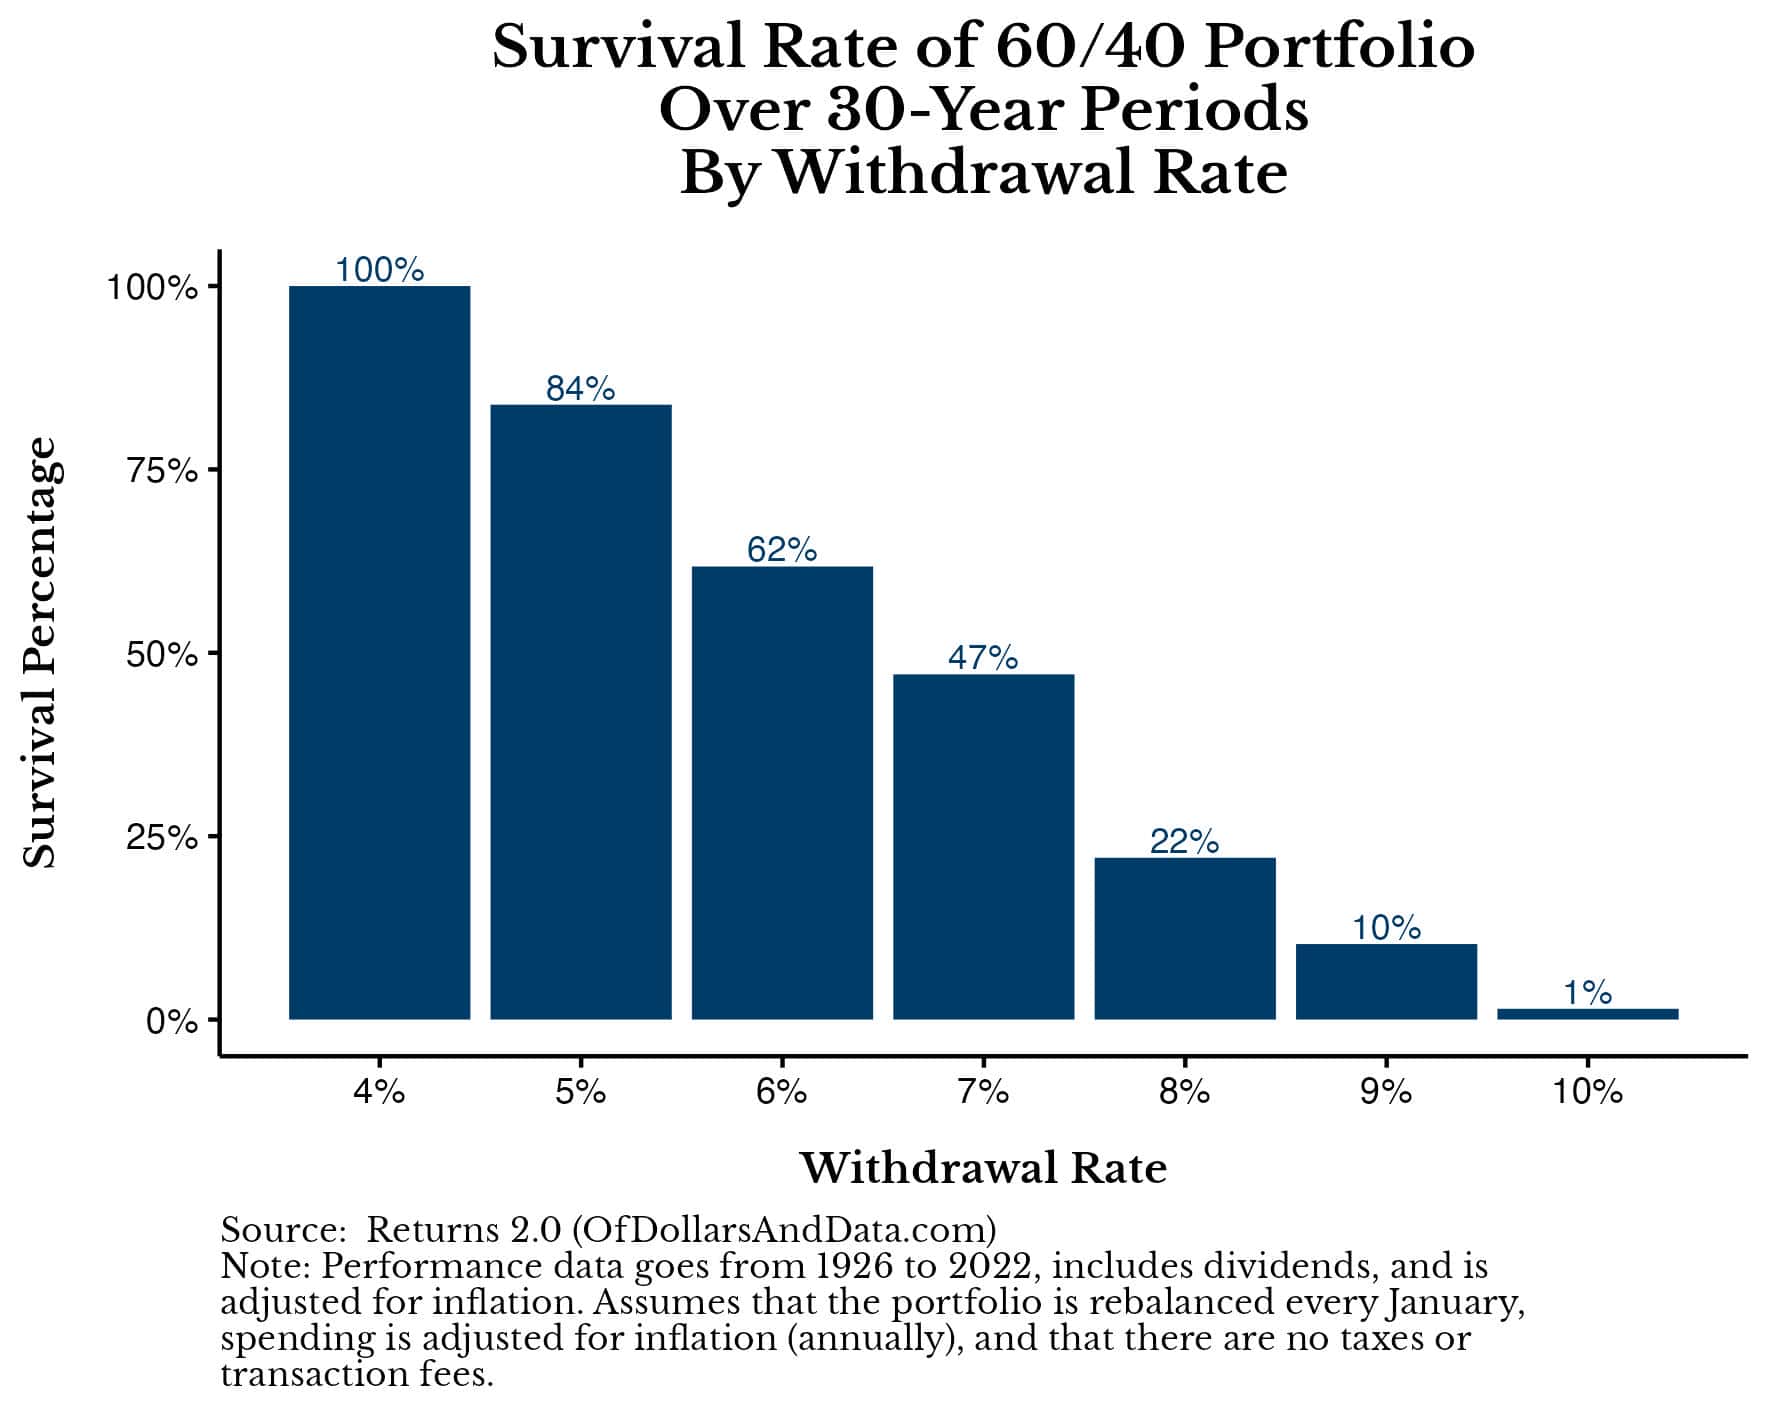 Chart showing the safe withdrawal rate simulation results for a 60/40 portfolio from 1926-2022.